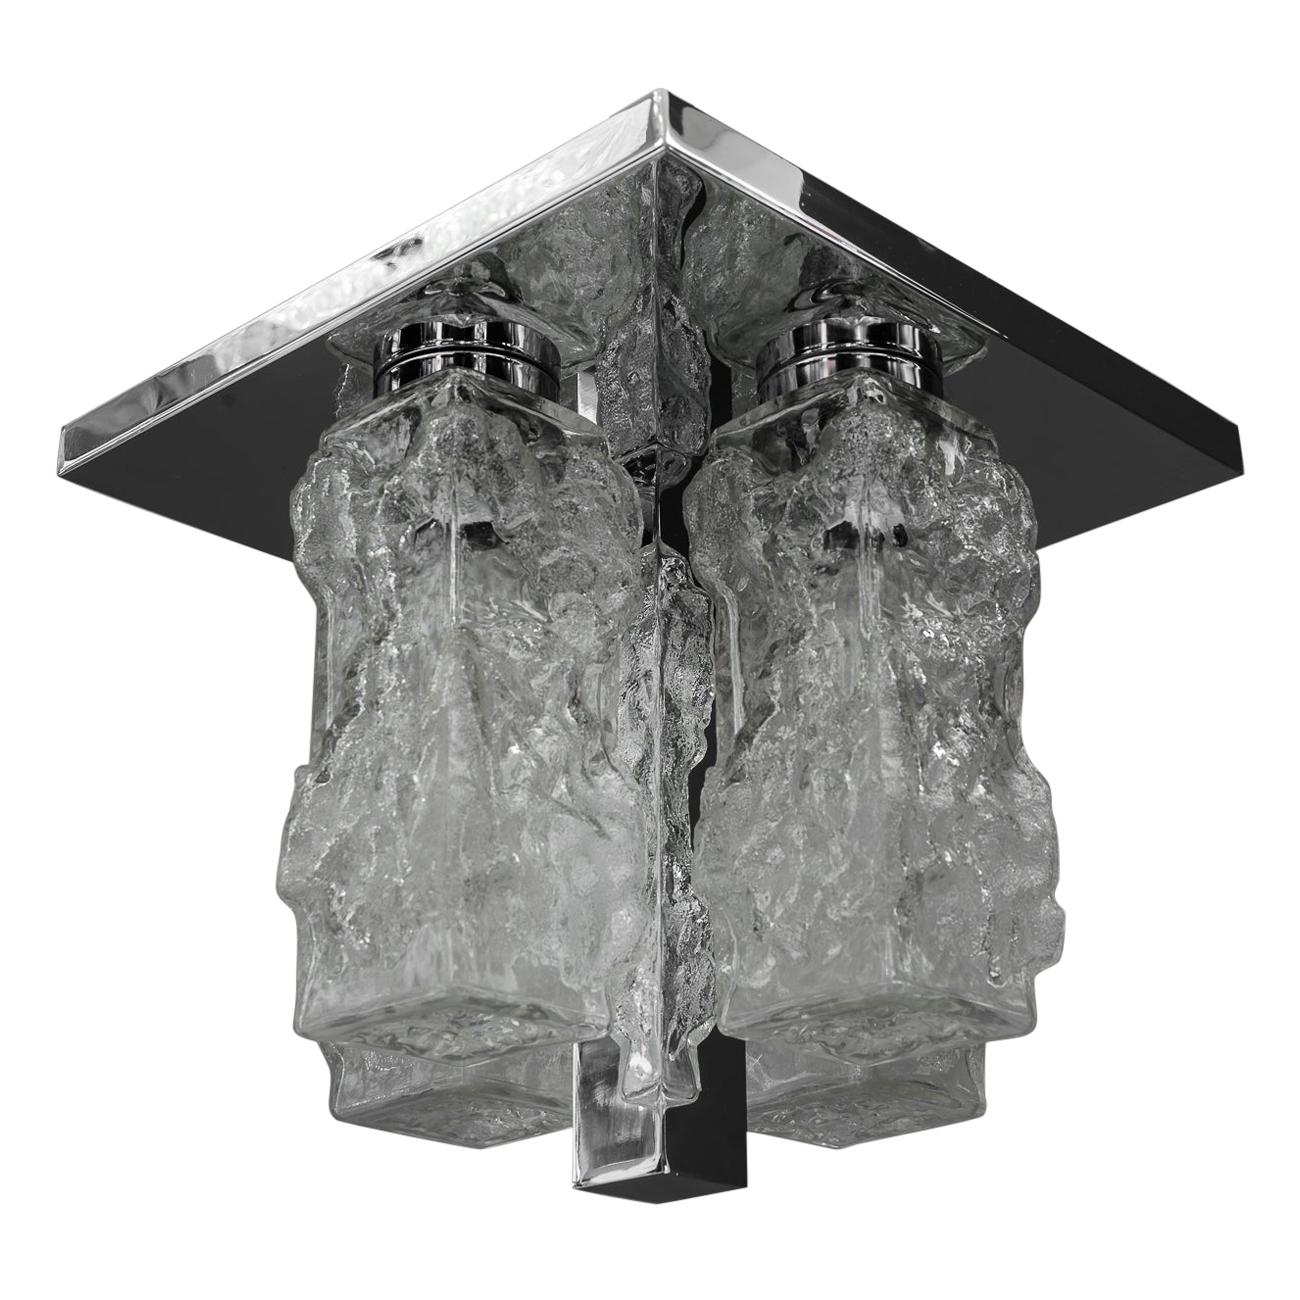 Petite Square Nickel-Plated Ice Glass Flush Mount by Hillebrand, Germany, 1970s